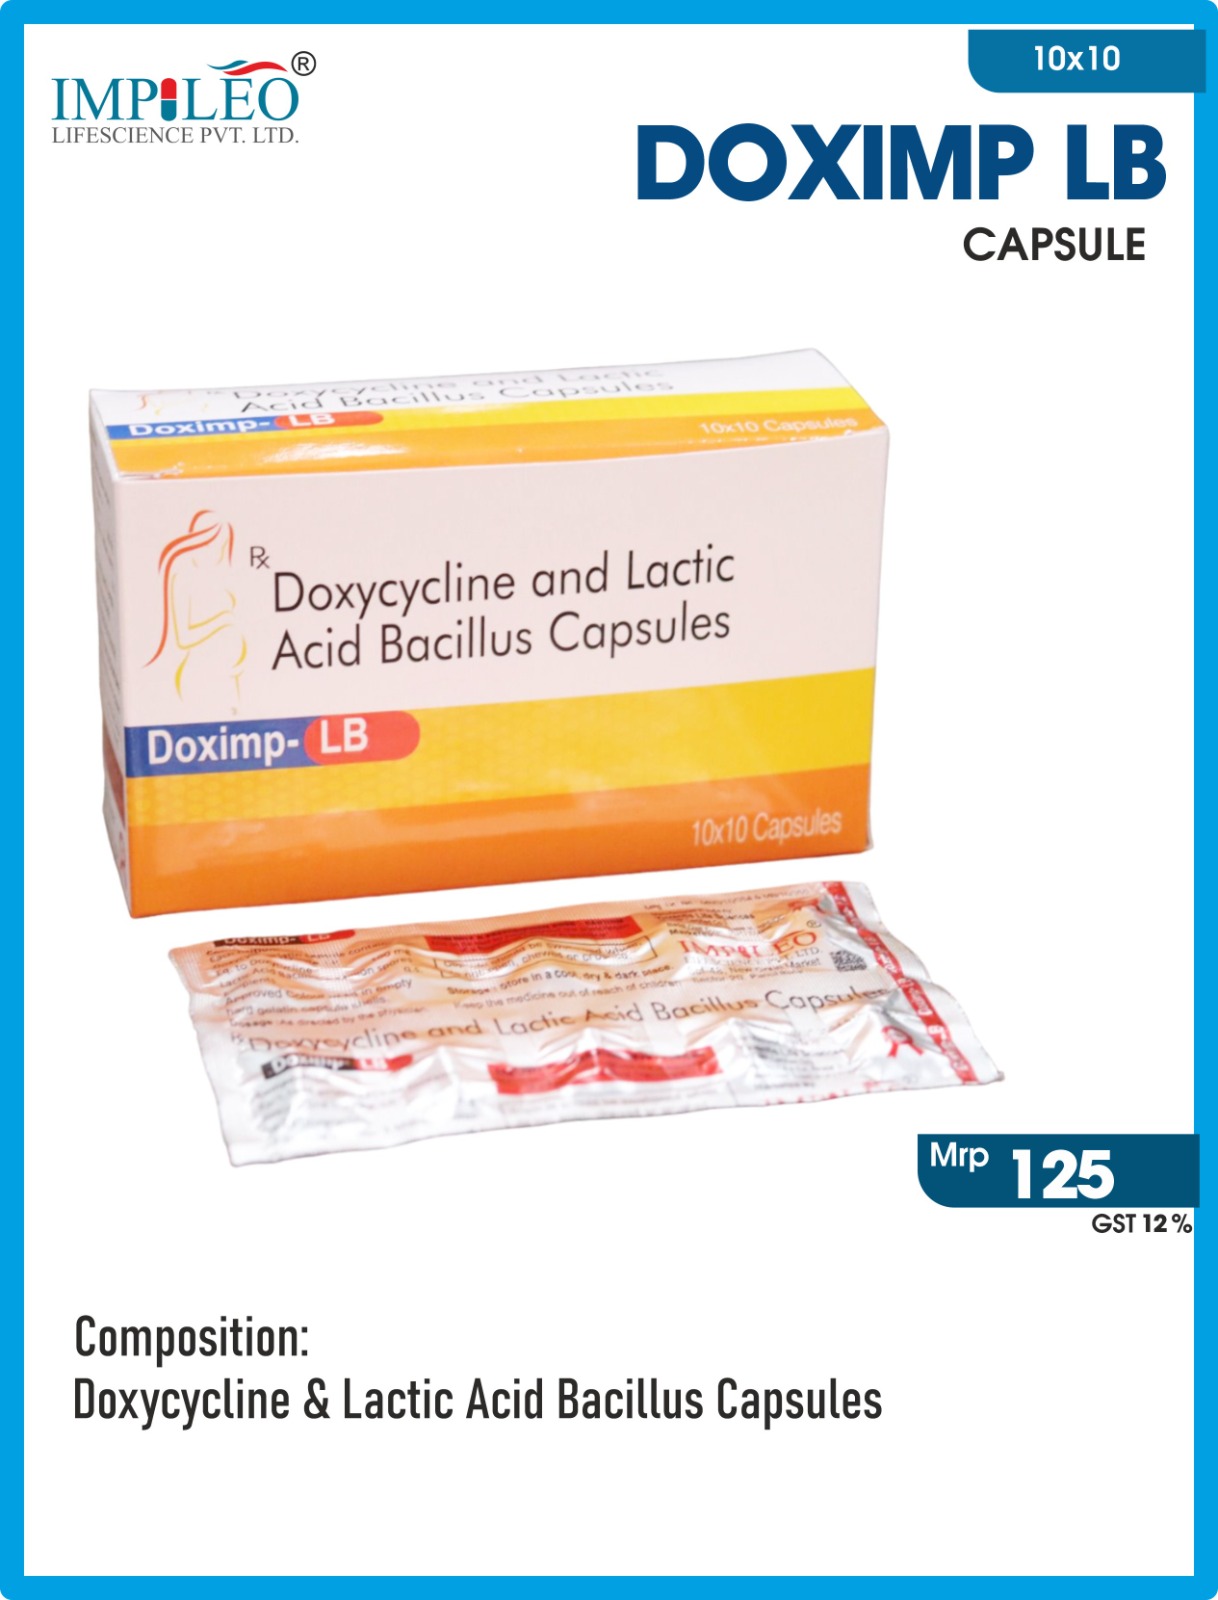 Top-Notch DEOXIMP LB Capsules Supply: Trusted Third Party Manufacturing in Baddi